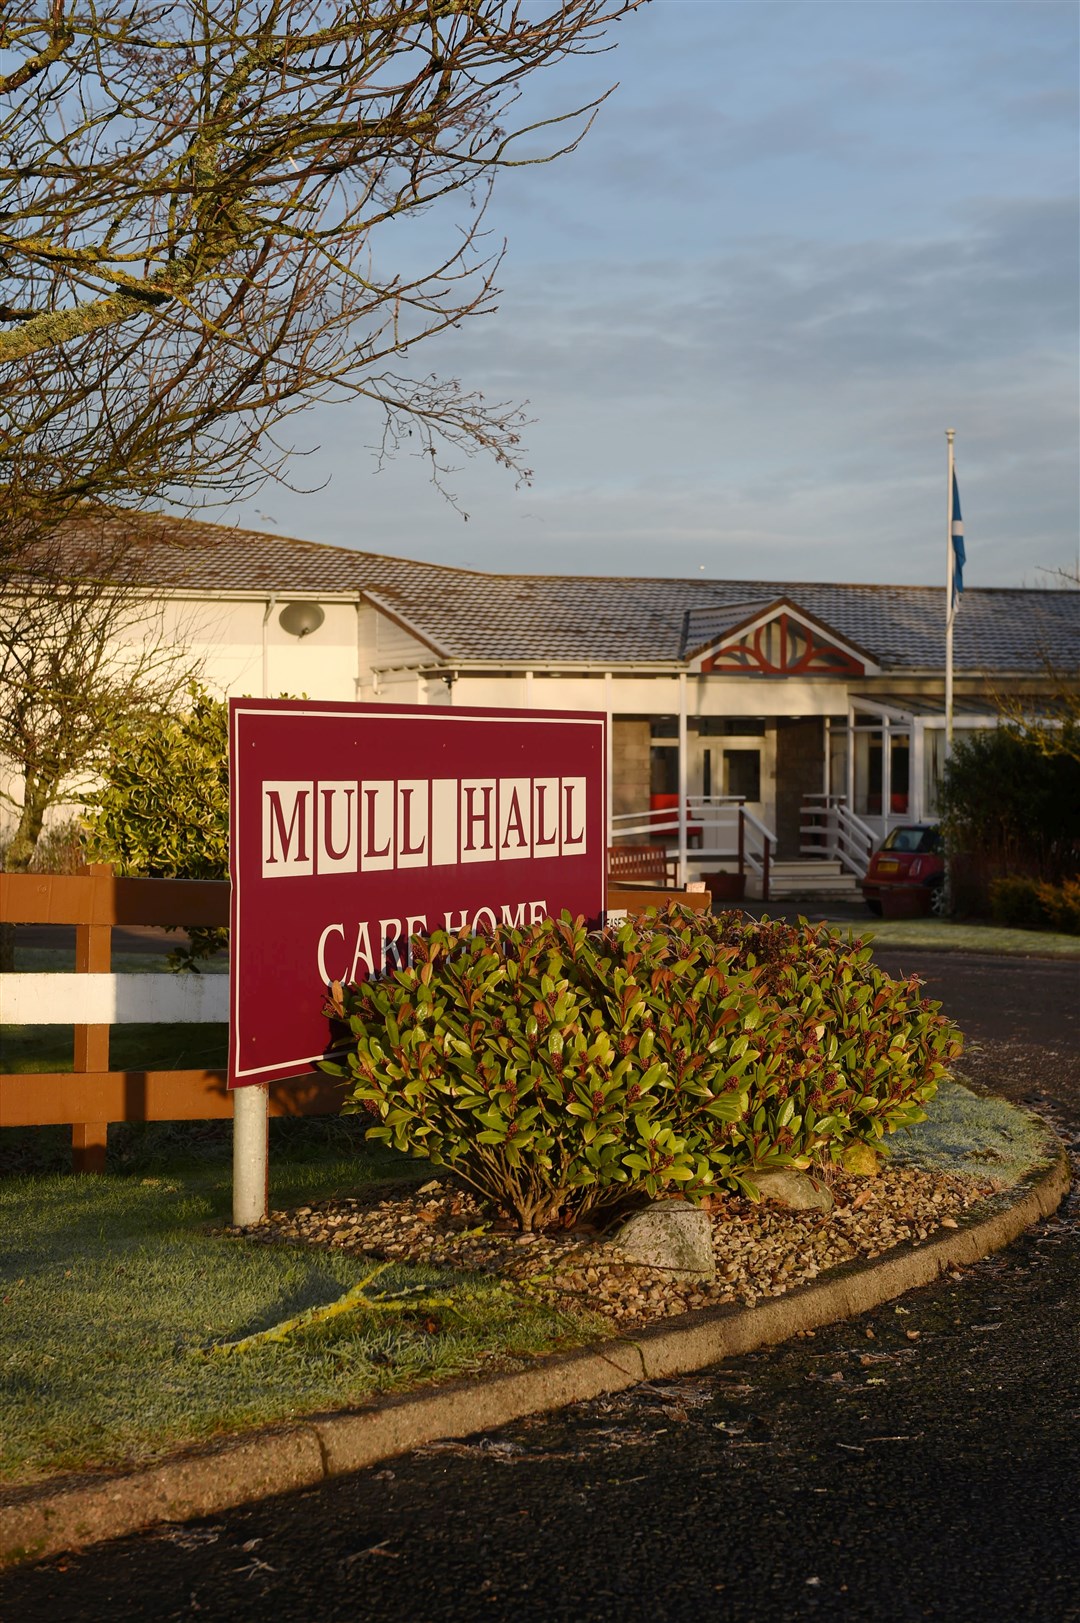 Mull Hall Care Home at Barbaraville in Easter Ross.